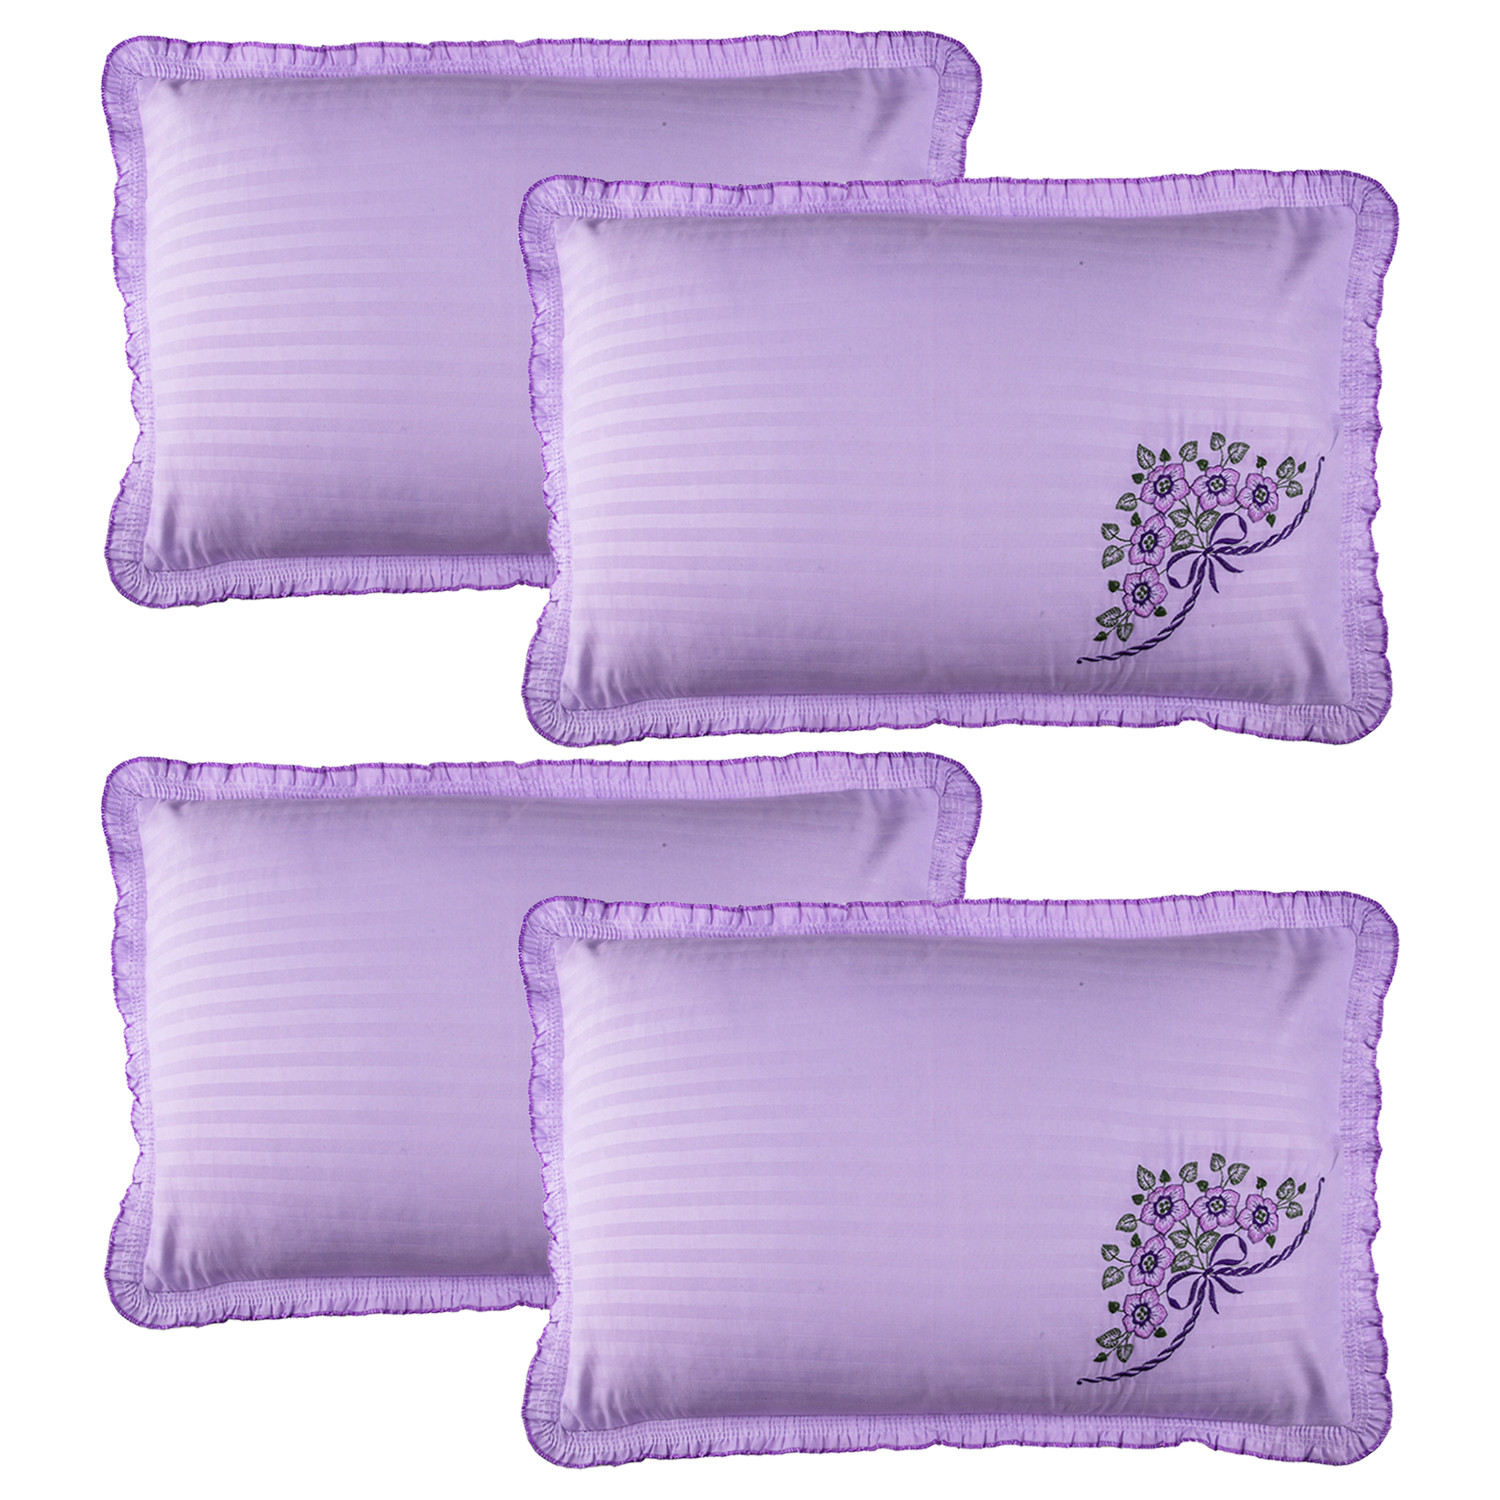 Kuber Industries Pillow Cover | Cotton Pillow Cover Set | Cushion Pillow Cover Set | Pillow Cover Set for Bedroom | Lining Embroidery Pillow Cover Set |Purple